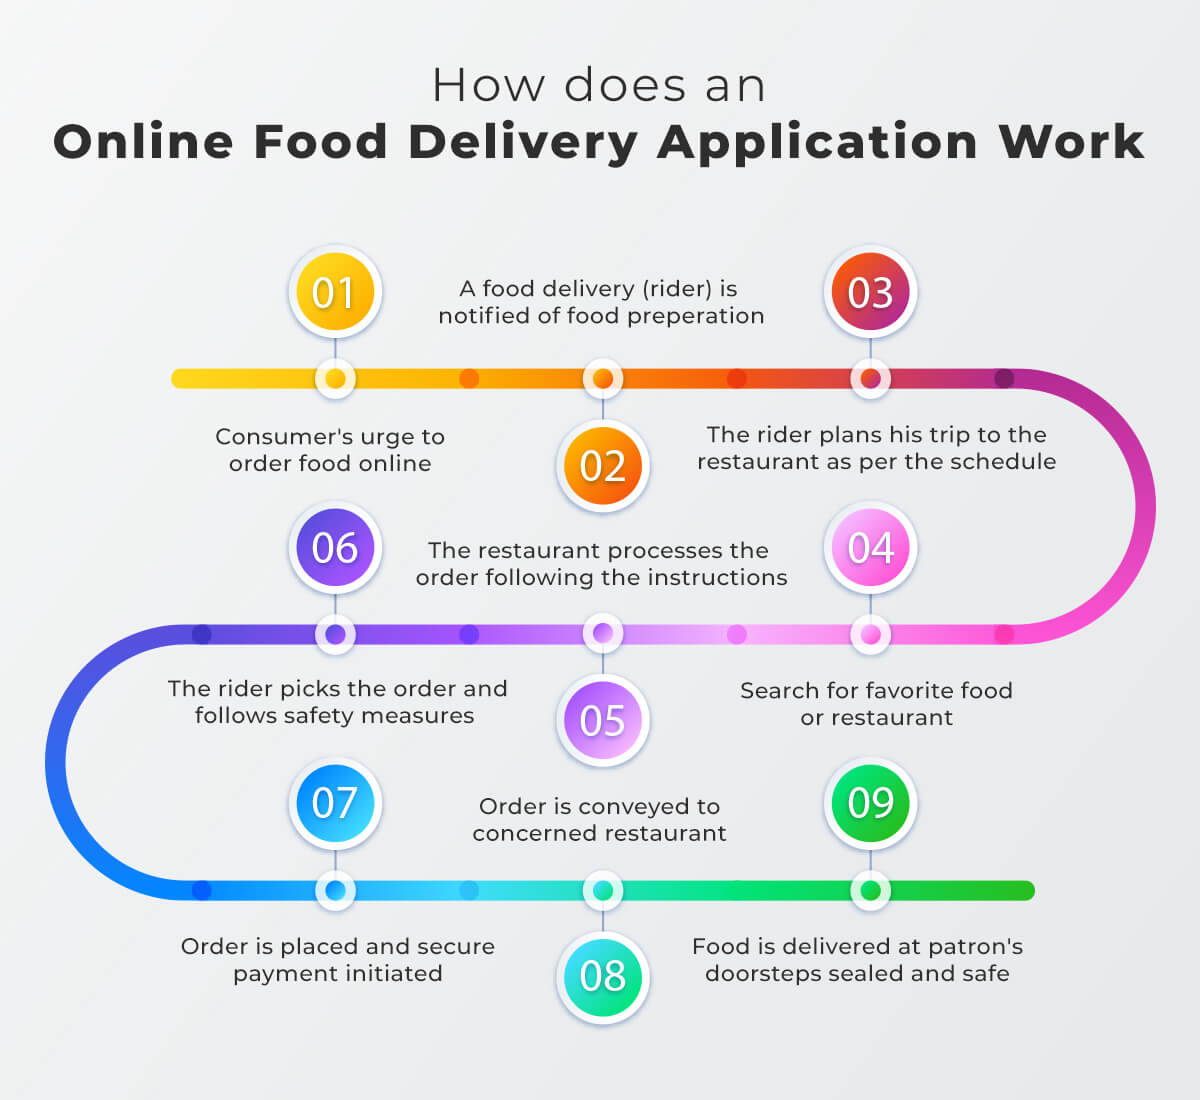 How does an Online Food Delivery Application Work